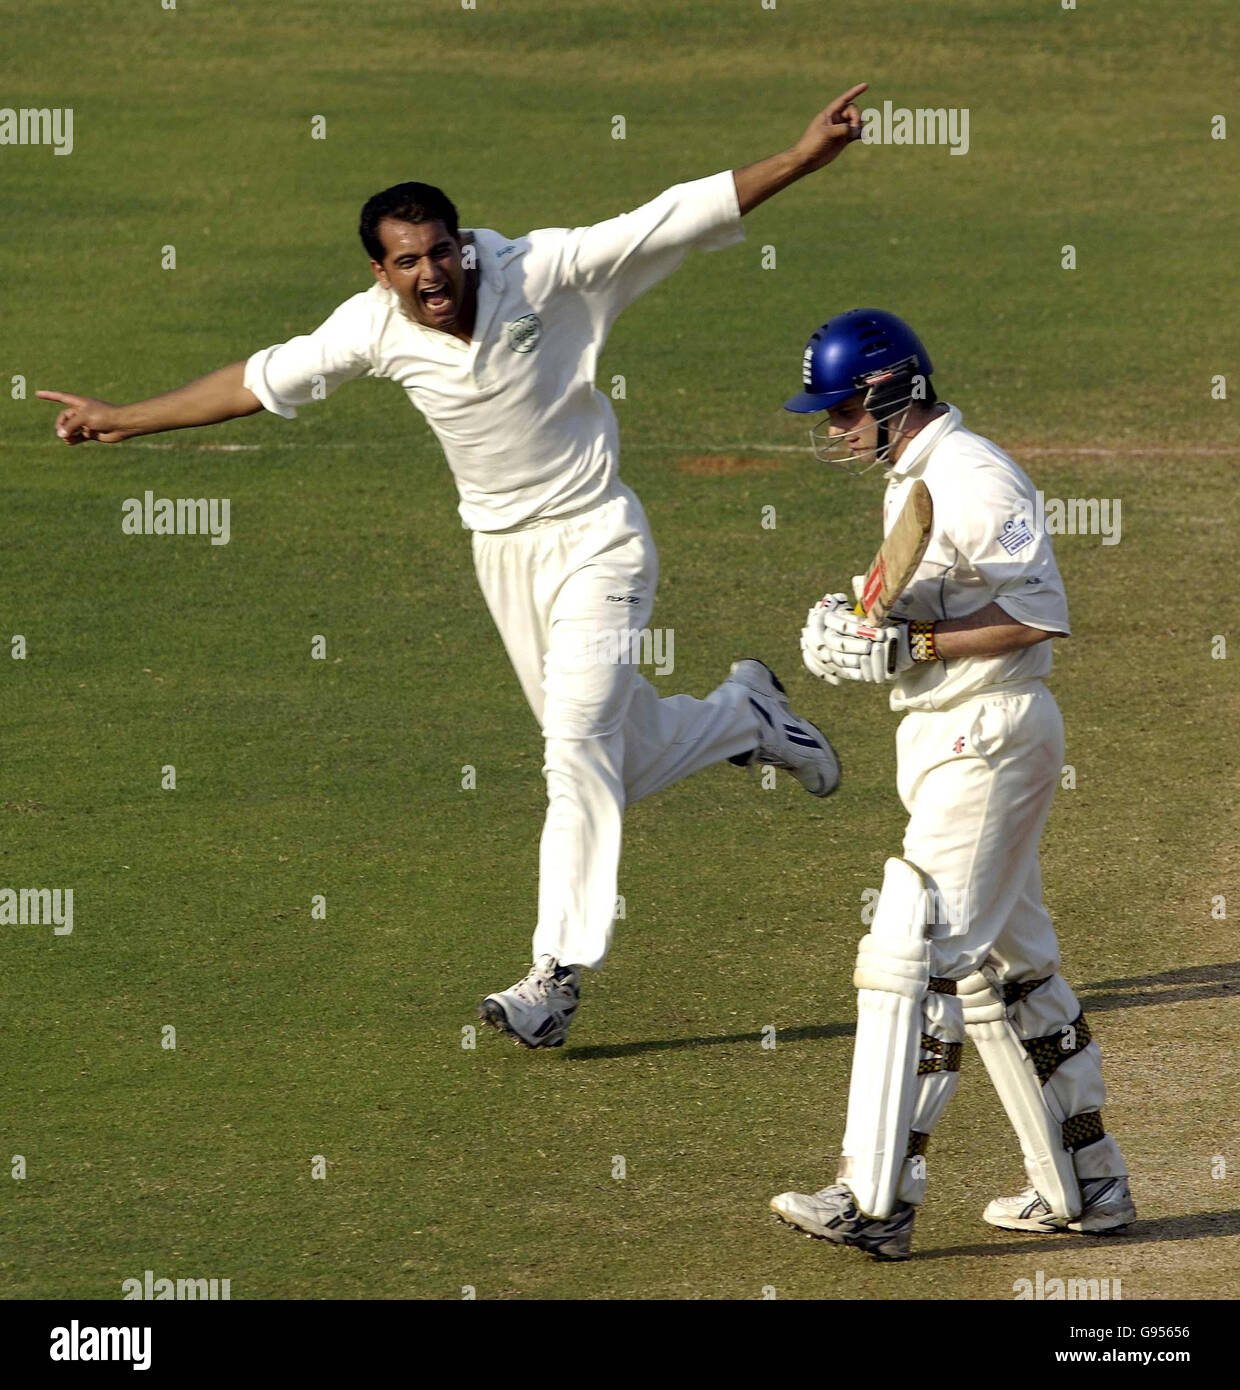 India's Abid Nabi celebrates the wicket of England's Andrew Strauss (R) during the second day of the opening tour match against the CCI Presidents XI at the Brabourne Stadium in Mumbai, India, Sunday February 19, 2006. PRESS ASSOCIATION Photo. Photo credit should read: Rebecca Naden/PA. Stock Photo